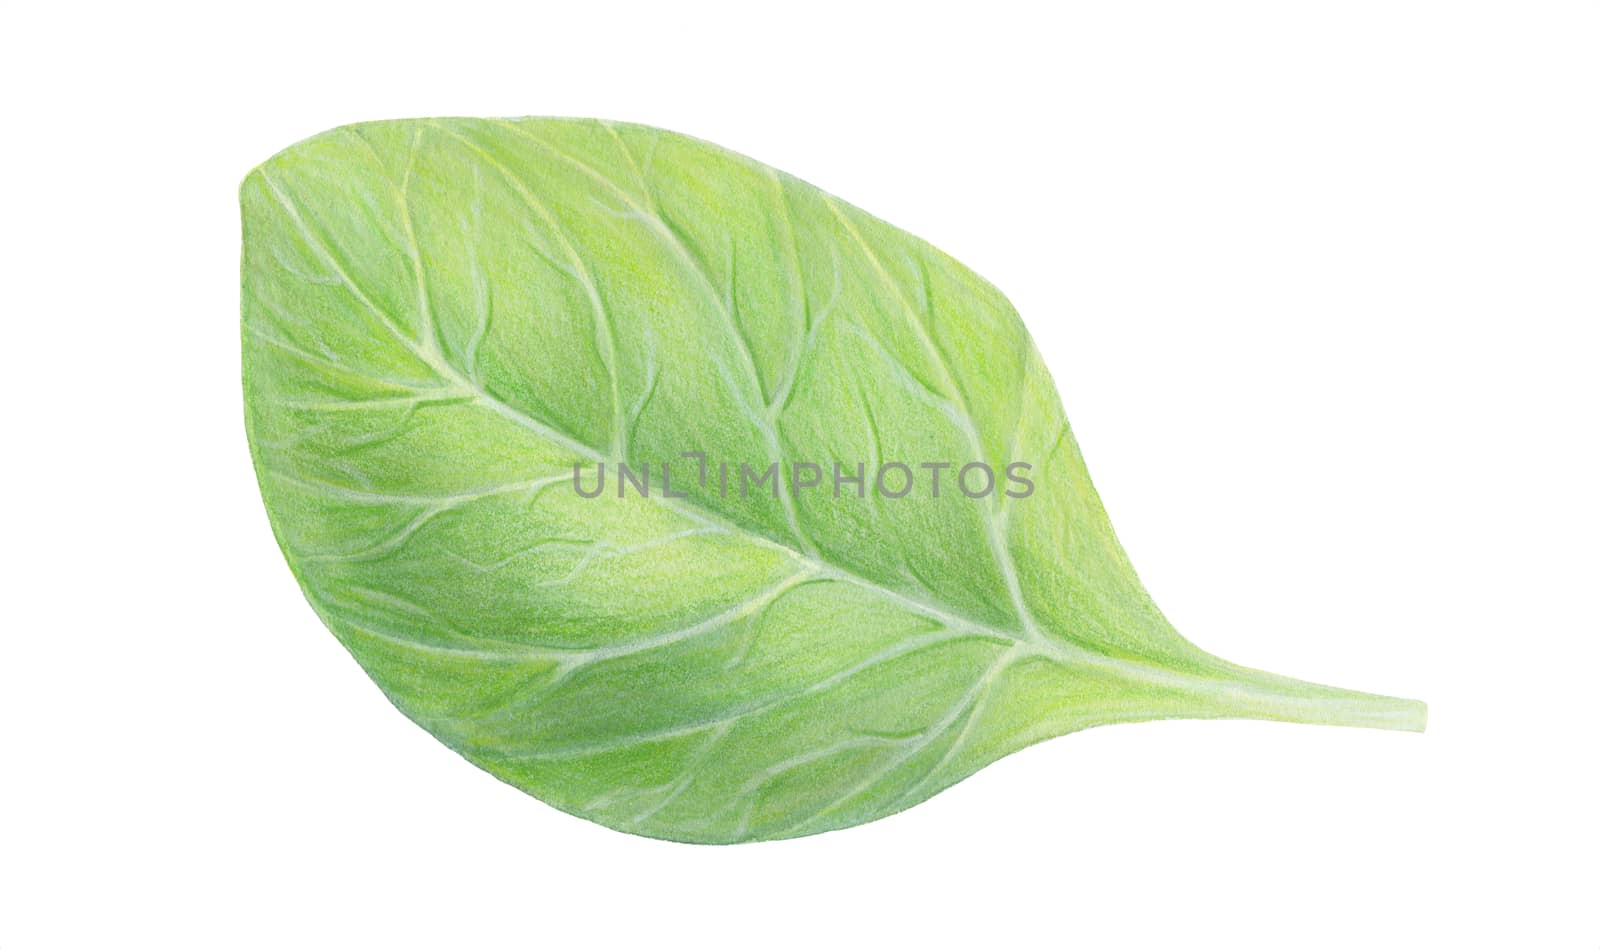 Fresh green spinach leaf isolated on white background. Watercolor hand drawn illustration. Fresh herbs. Realistic botanical art. Vegetarian Ingredient. For logo, packaging, print, organic food,market